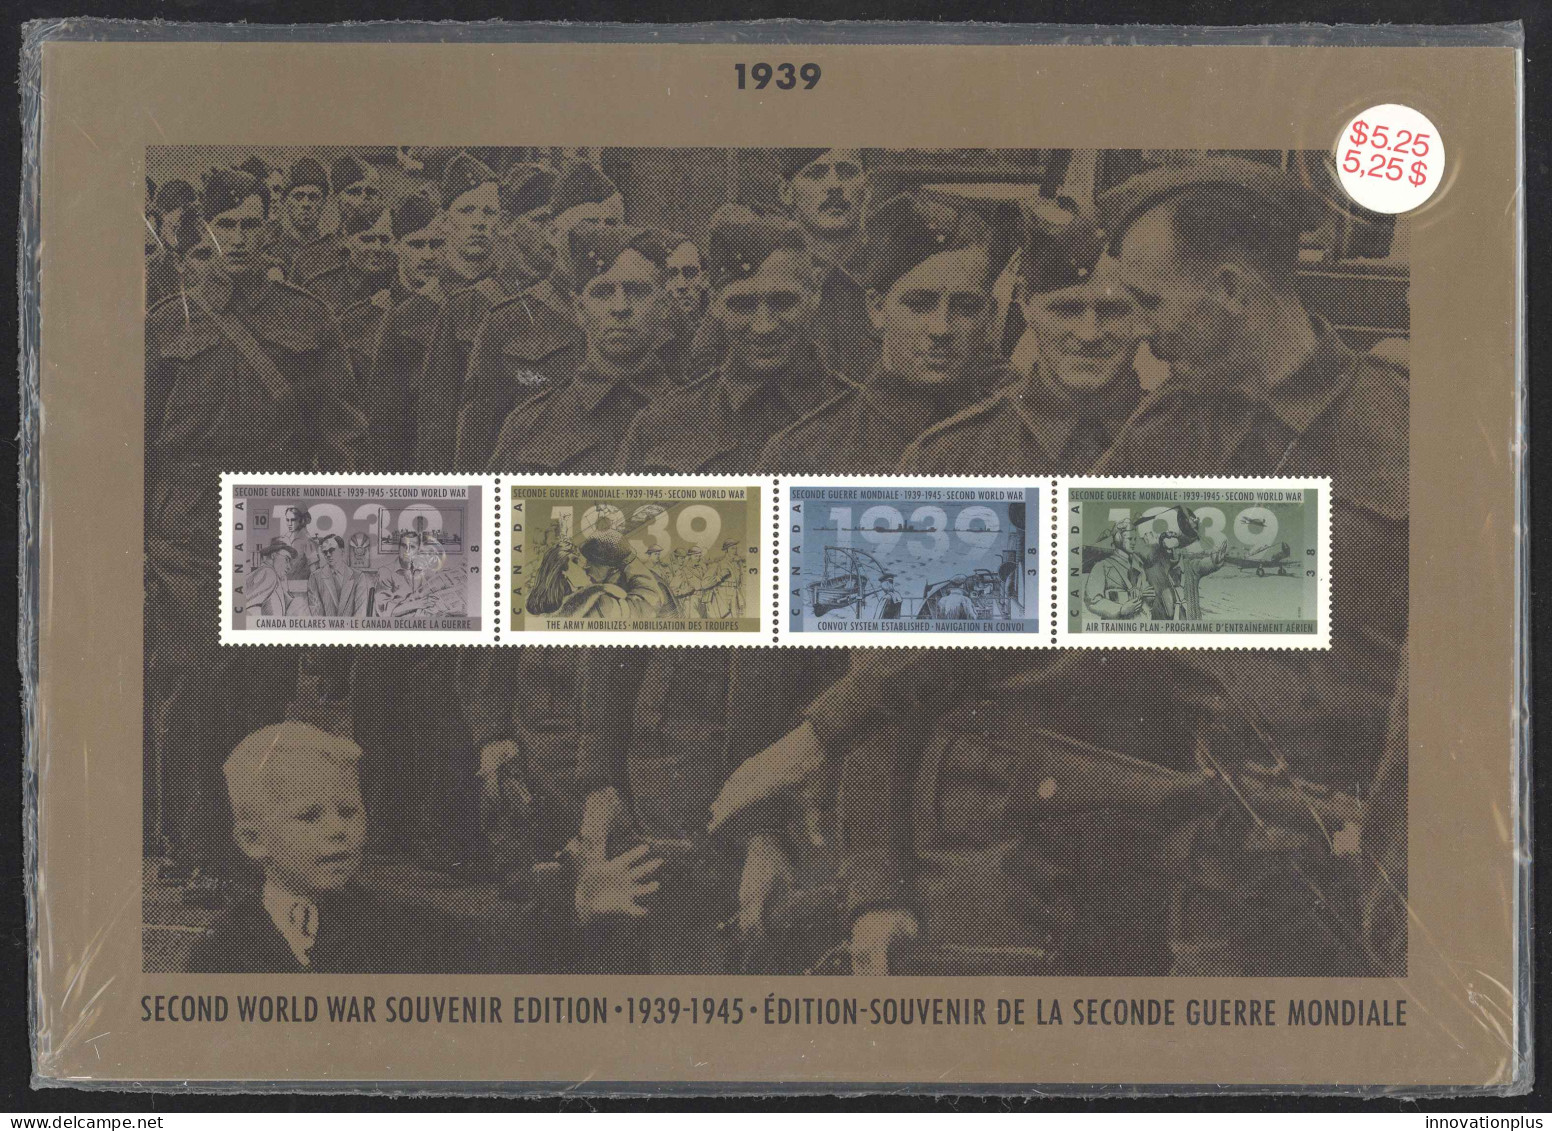 Canada Post Thematic Sc# 43 Mint (SEALED) 1989 WWII 1939 - Estuches Postales/ Merchandising